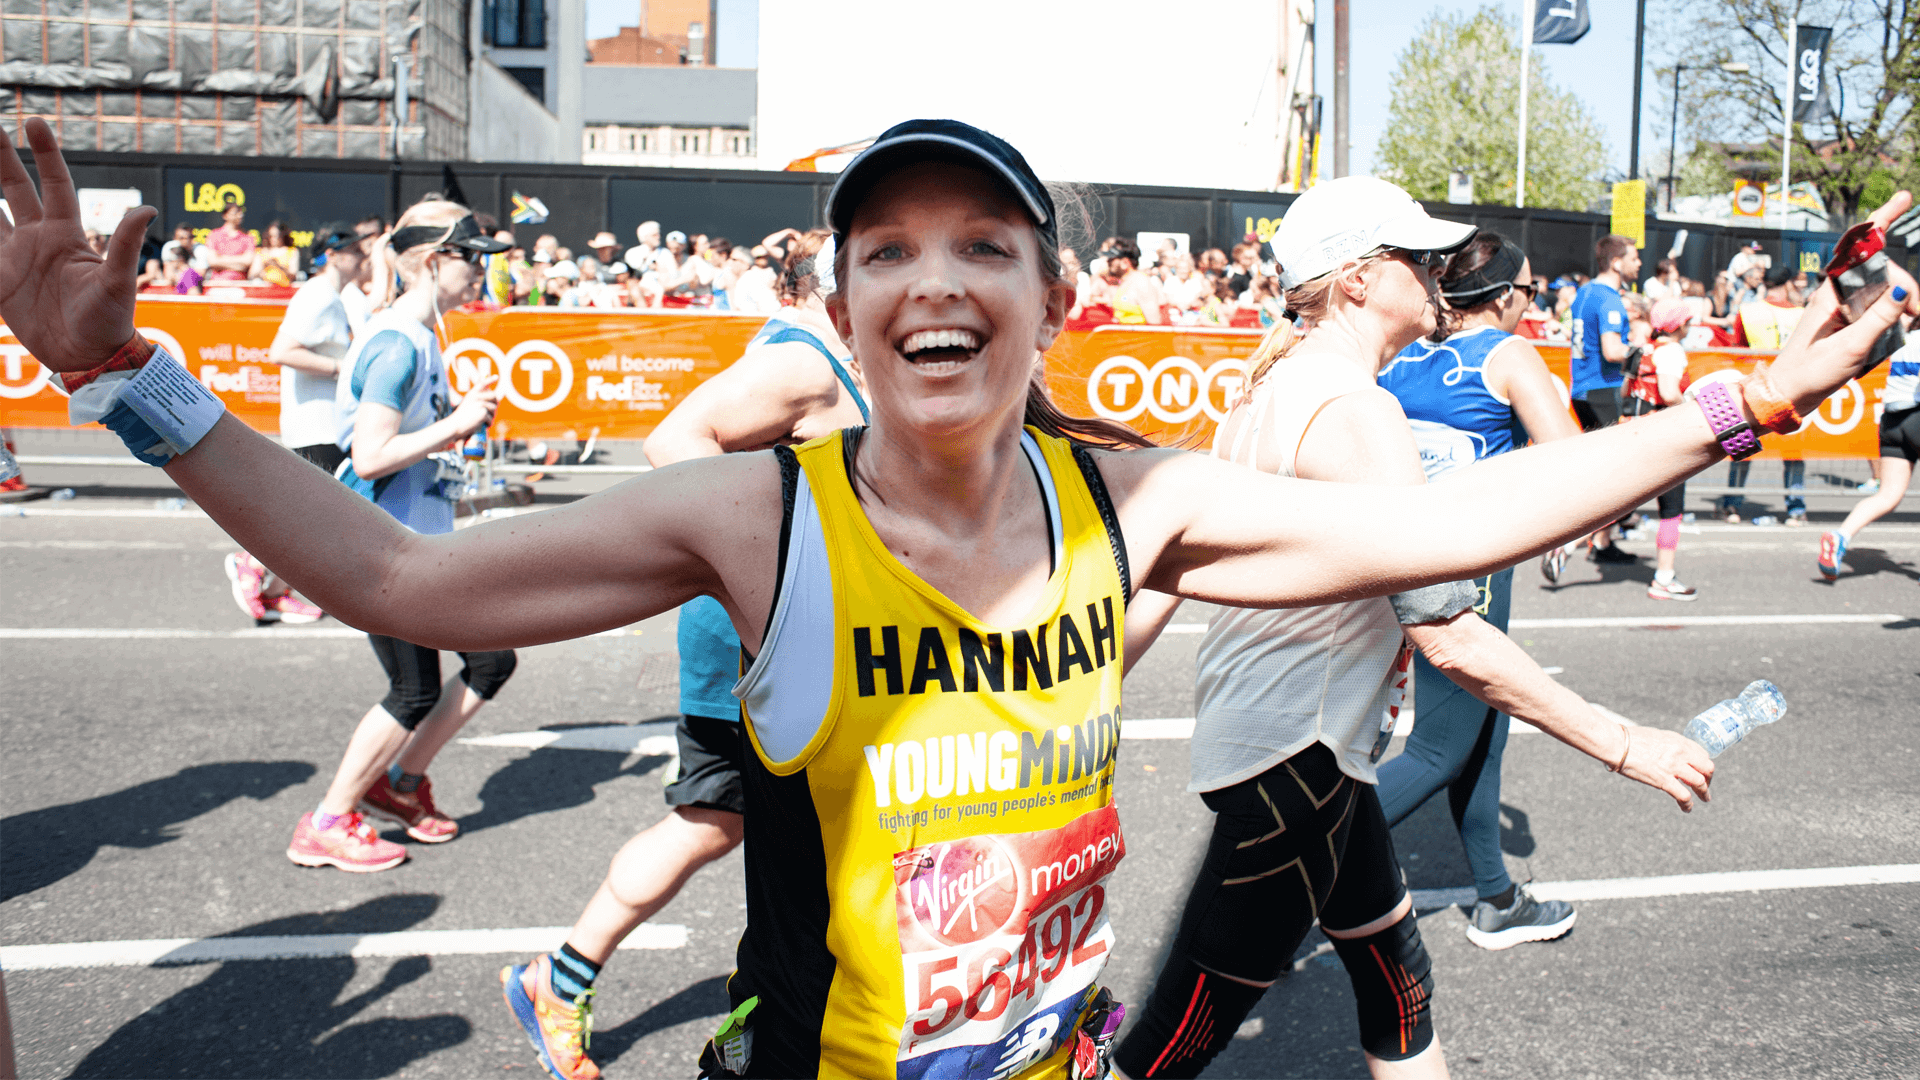 a member of team YoungMinds runner smiles at the camera during the marathon